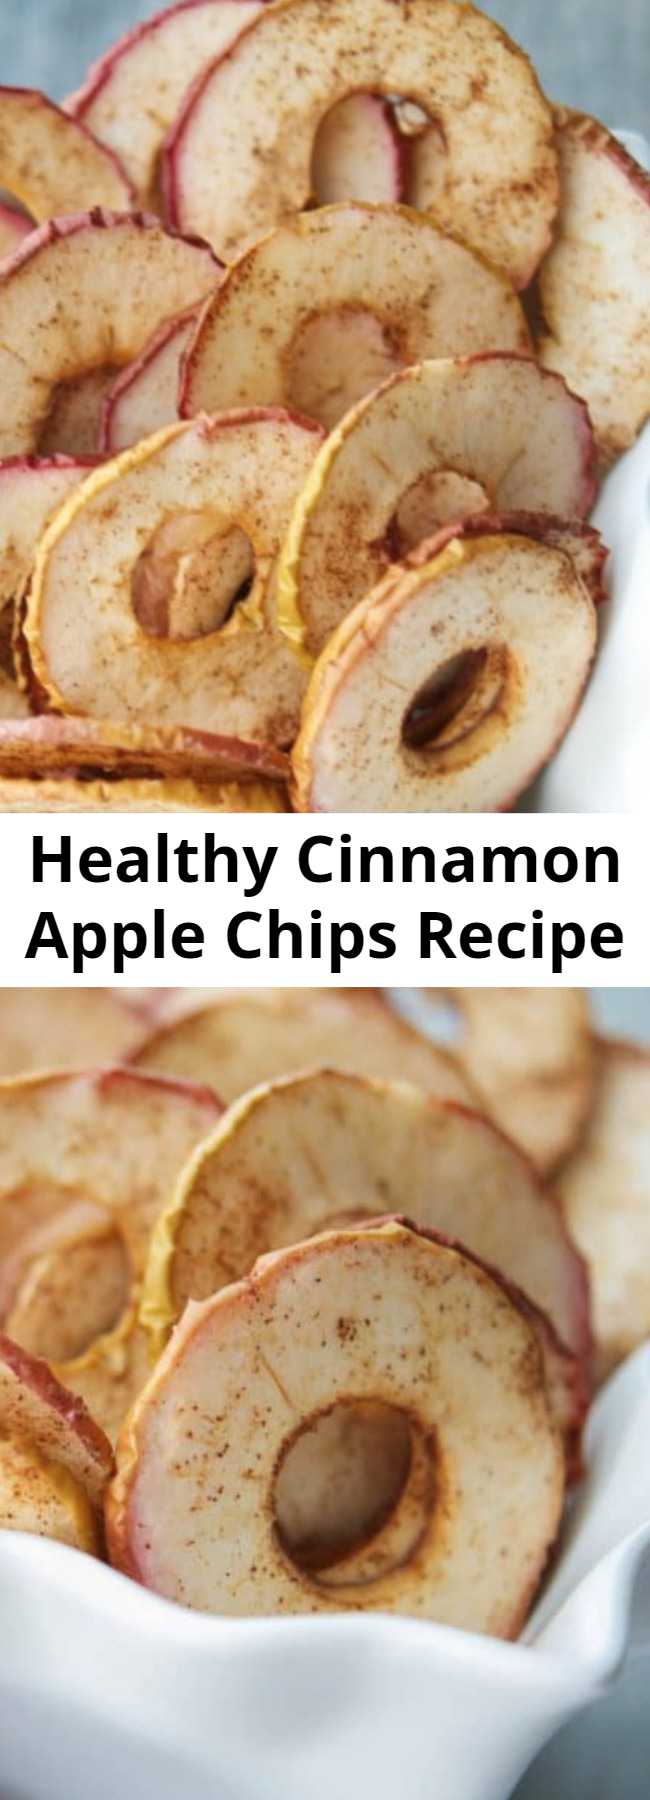 Healthy Cinnamon Apple Chips Recipe - Cinnamon Apple Chips, made with a few simple ingredients like McIntosh apples, cinnamon and sugar are a healthy snack your whole family will love.